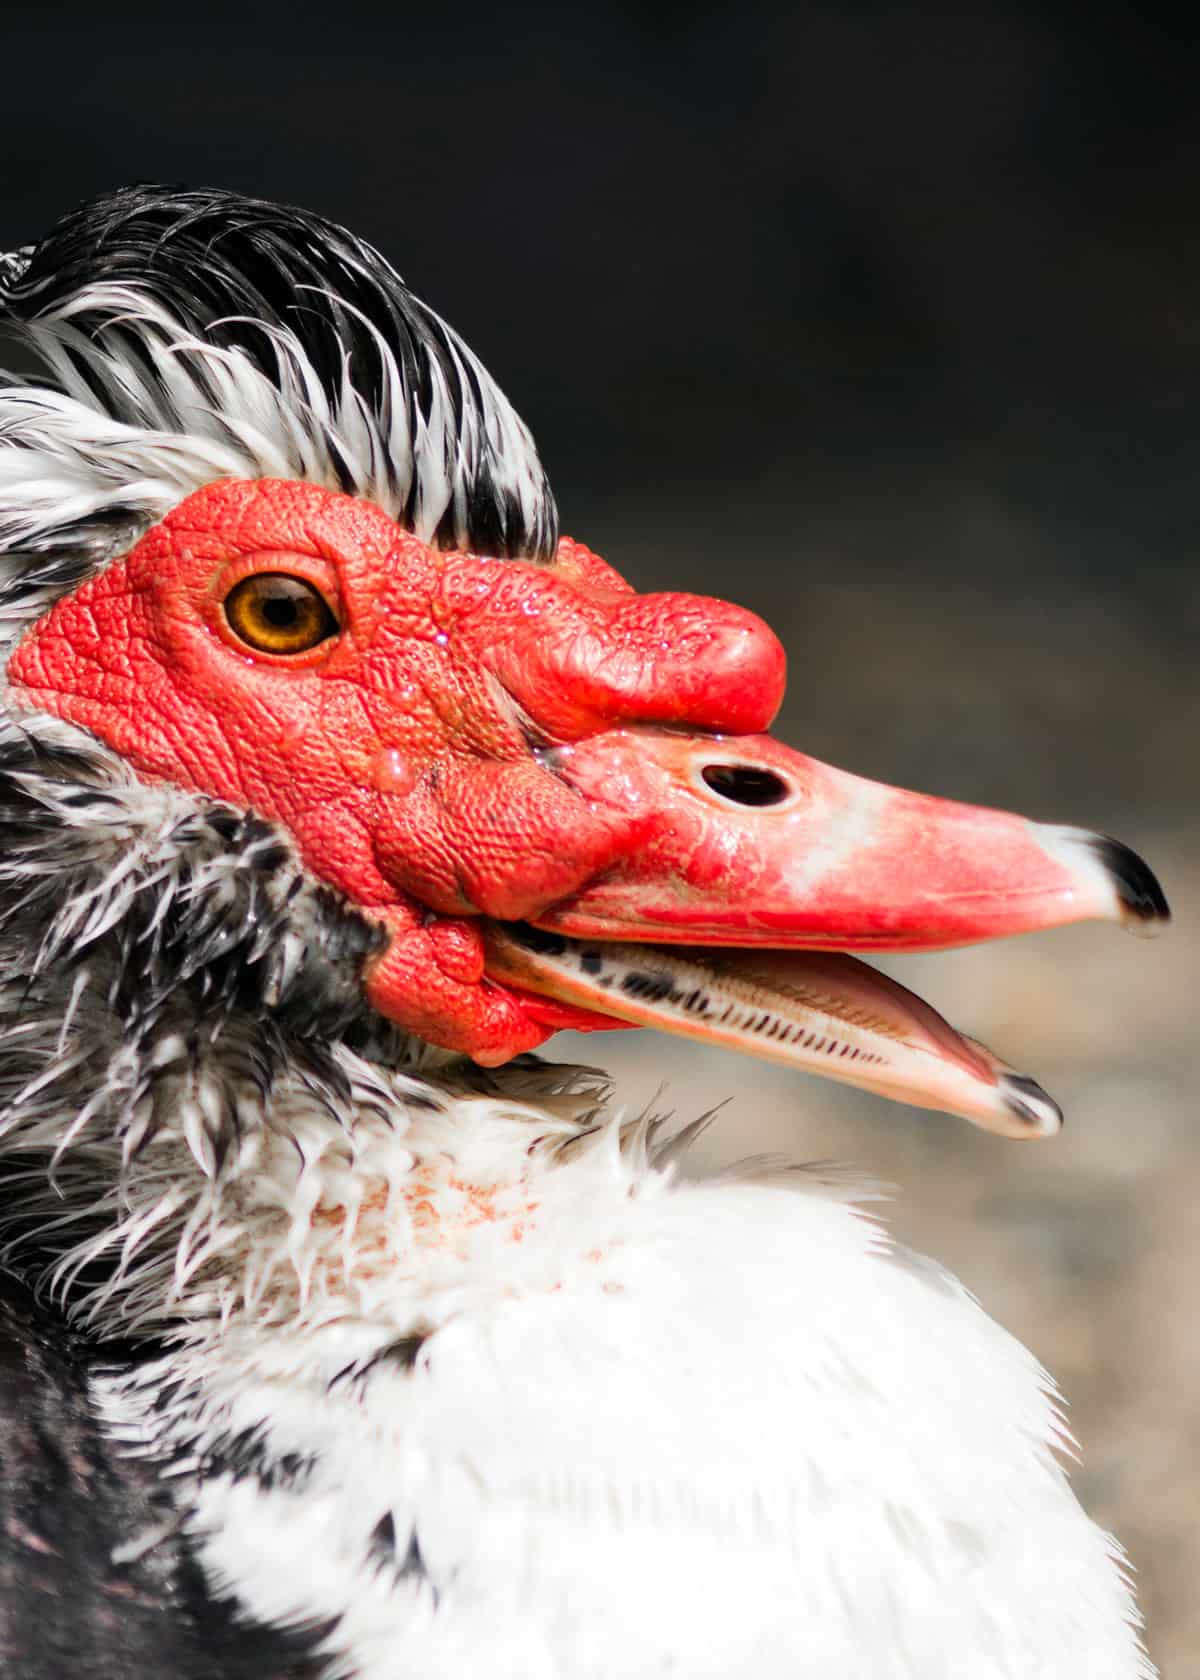 Muscovy duck face